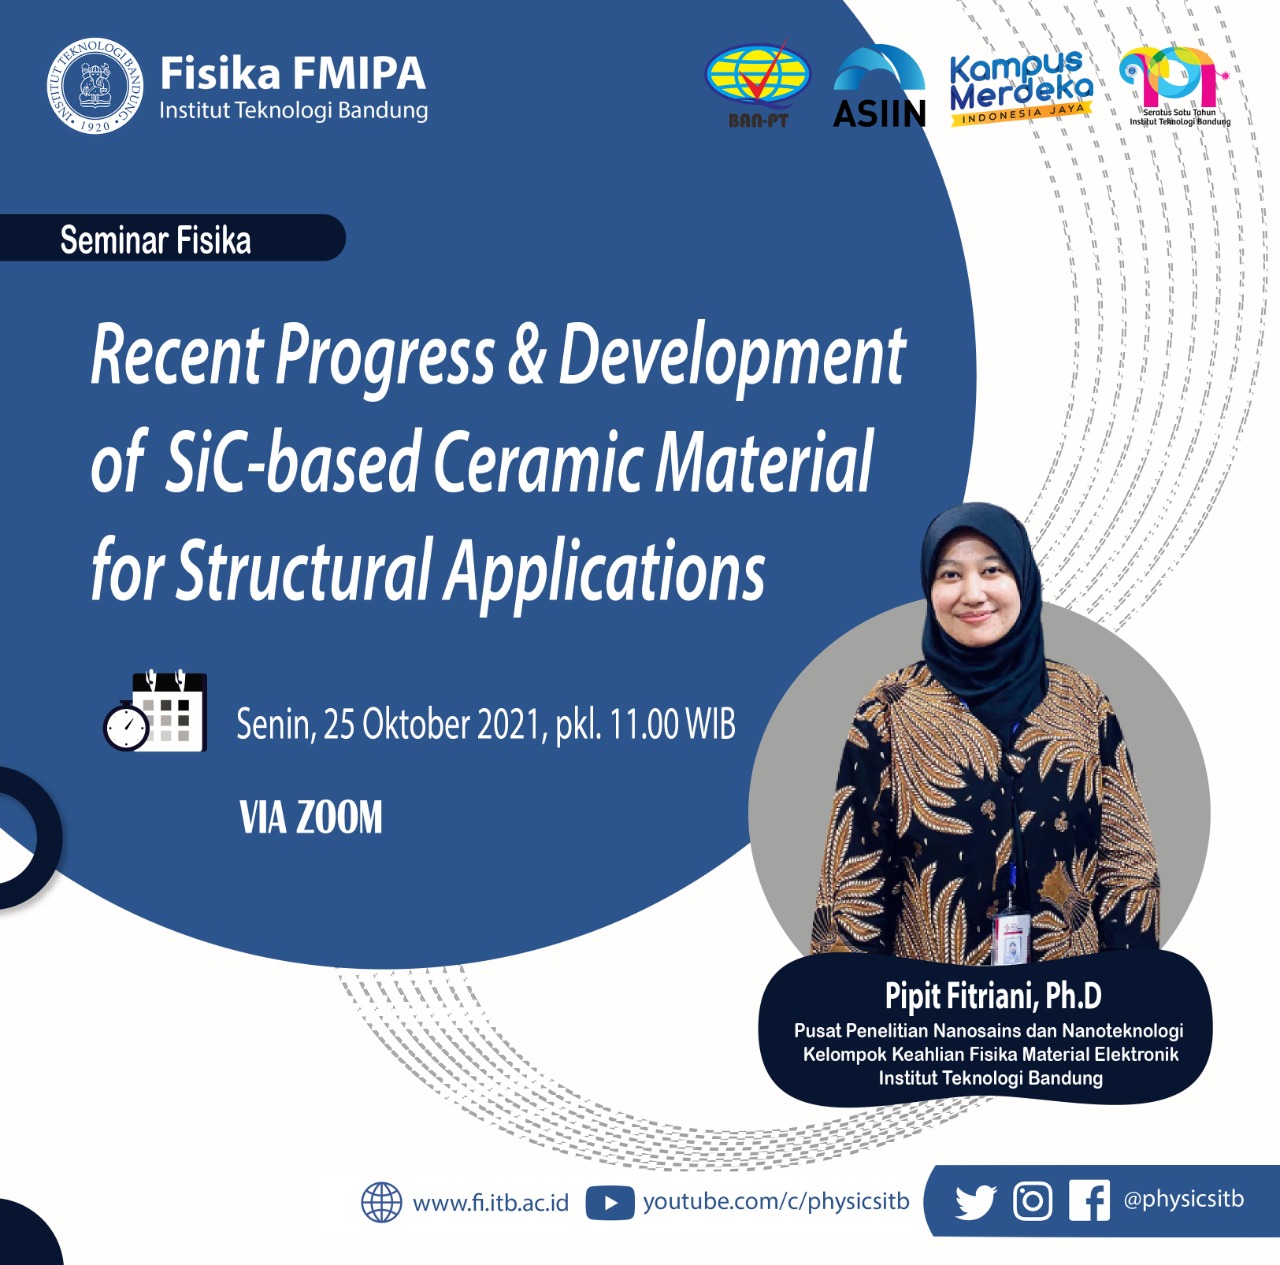 Recent Progress & Development of SiC-based Ceramic Material for Structural Applications